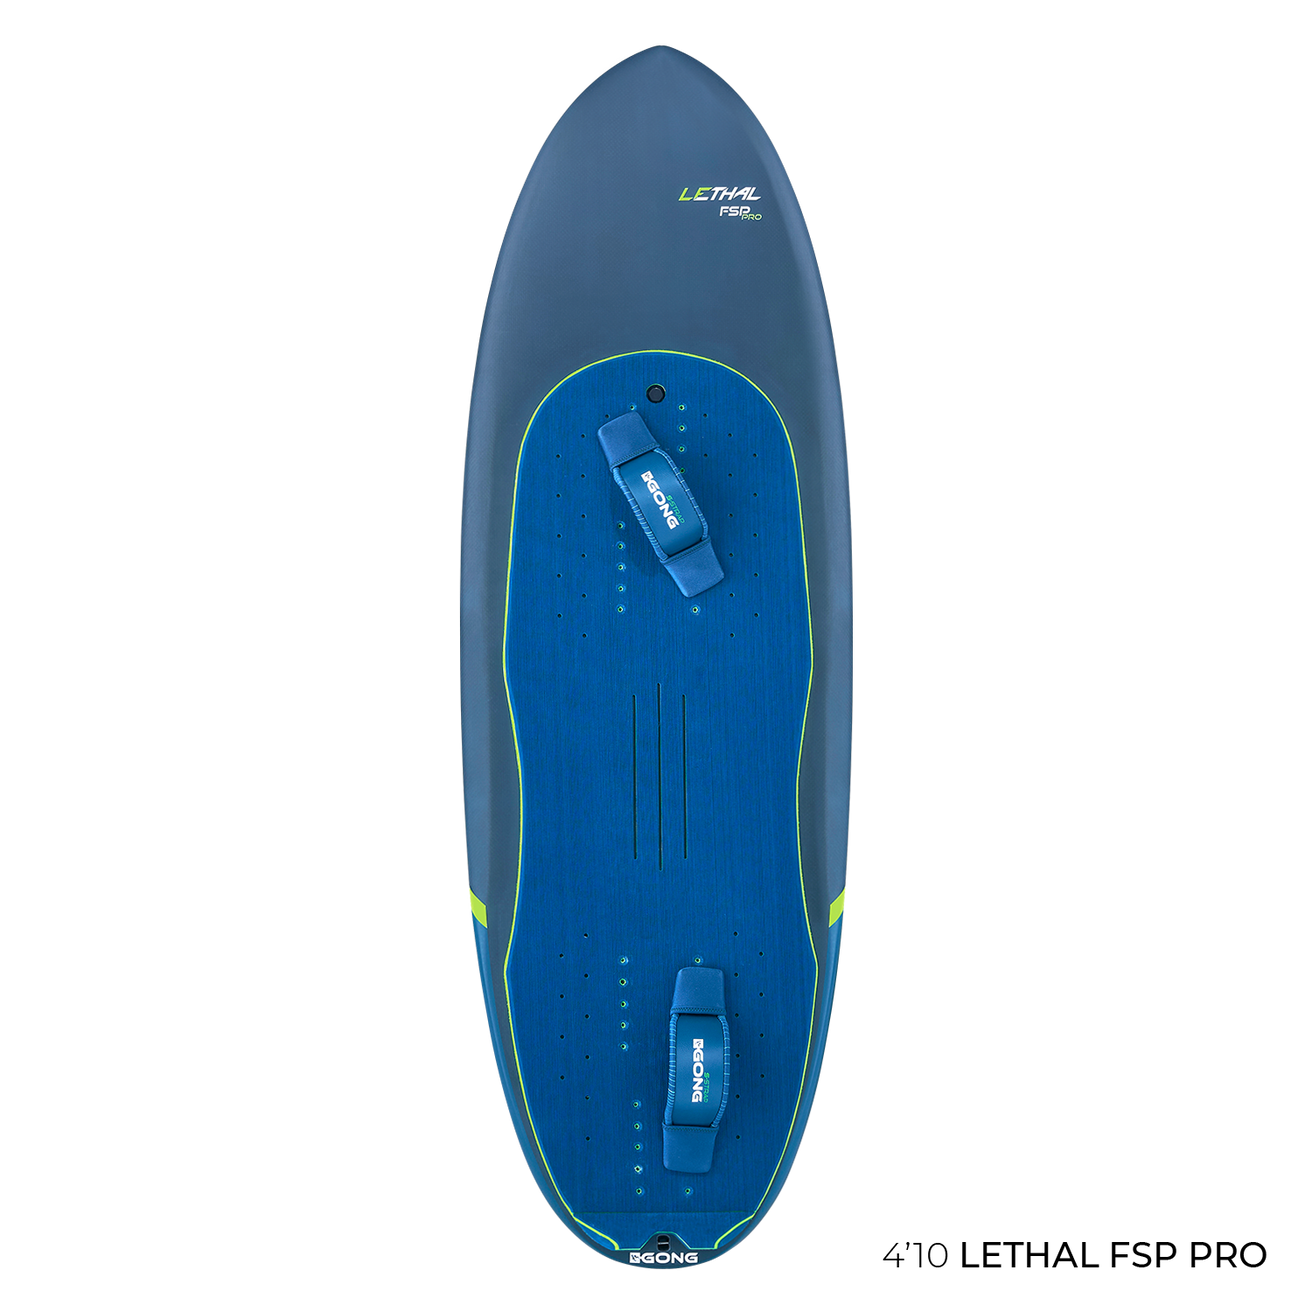 GONG | Surfoil Lethal FSP Pro 4'8 Second Rate 7203